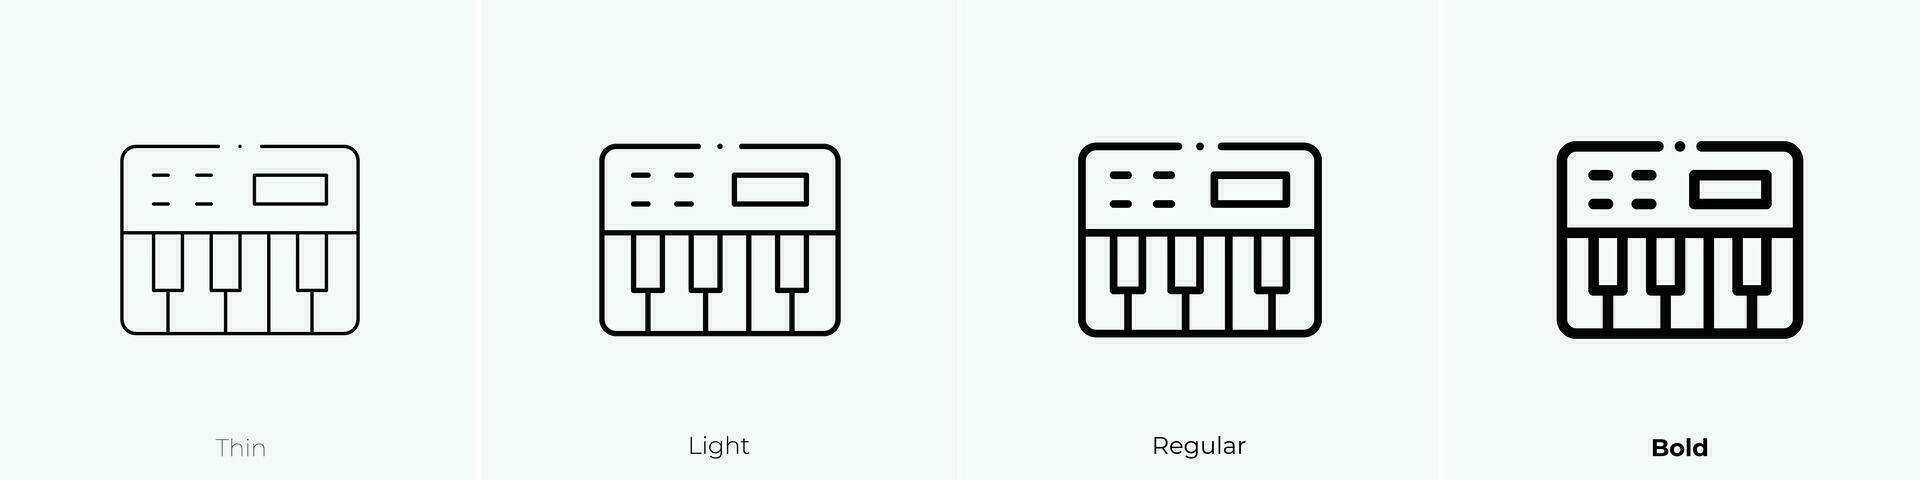 piano keyboard icon. Thin, Light, Regular And Bold style design isolated on white background vector